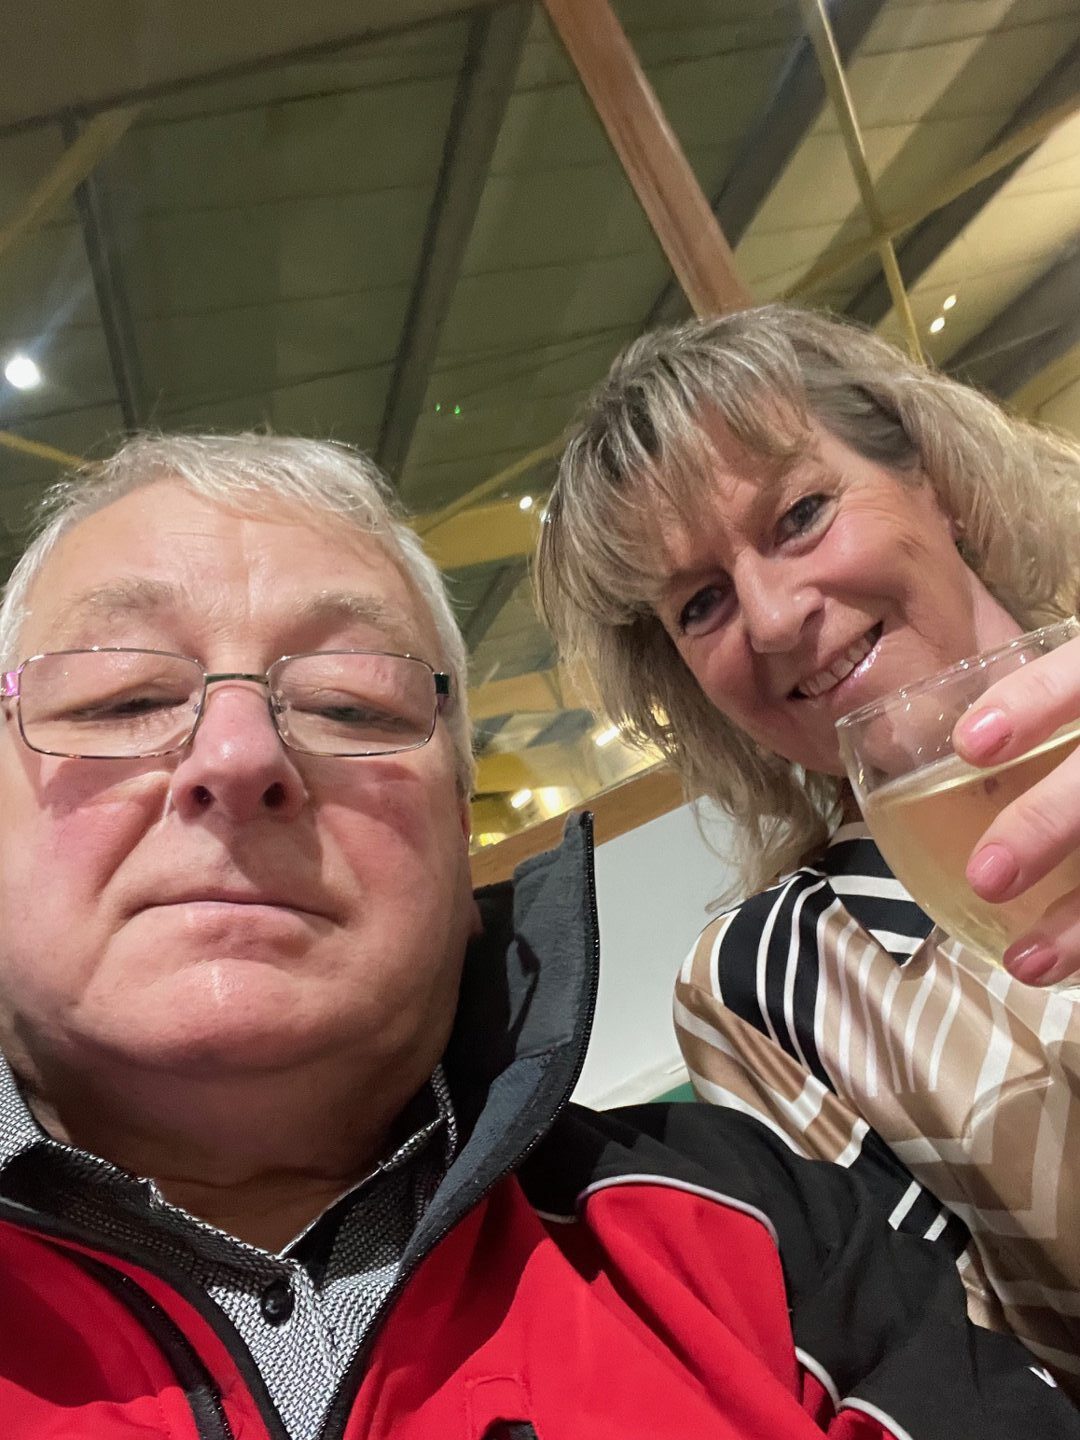 A selfie photo of Tommy and Margaret holding a glass of wine